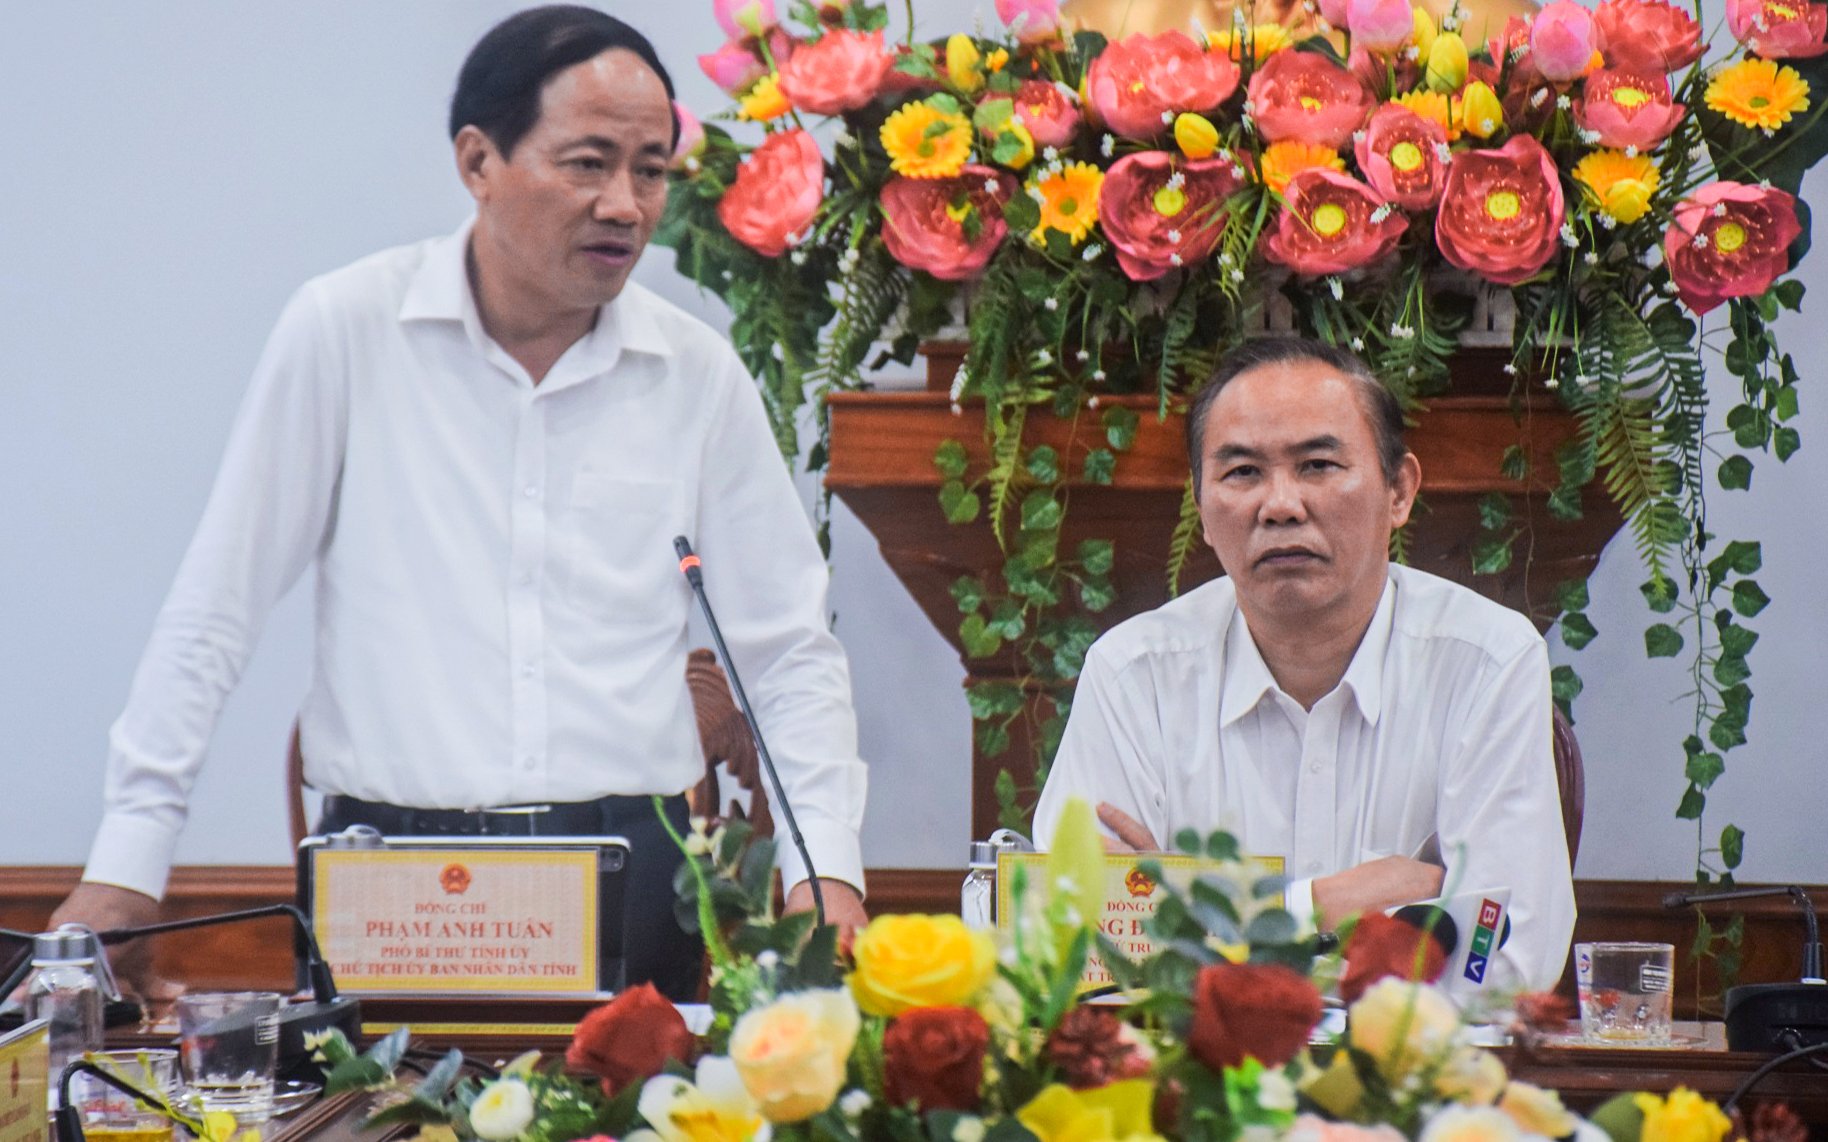 Mr. Pham Anh Tuan (left), Chairman of Binh Dinh Provincial People's Committee, requested the working group of the Ministry of Agriculture and Rural Development to help the functional sector of this province overcome shortcomings. Photo: V.D.T.